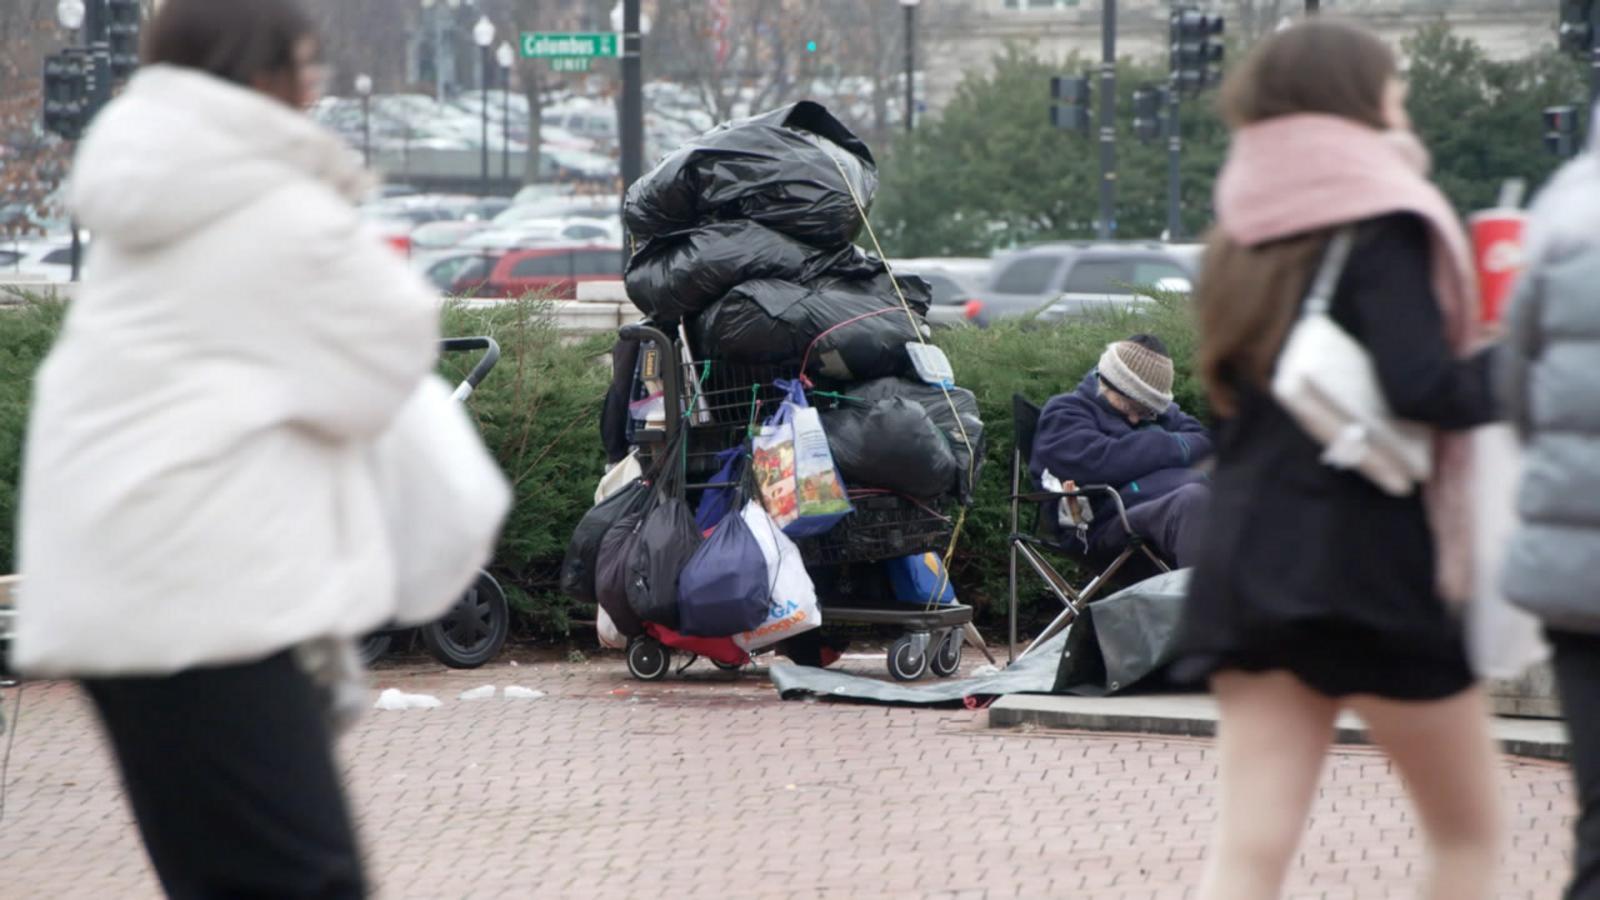 VIDEO: Supreme Court to hear high-stakes case on homeless encampments